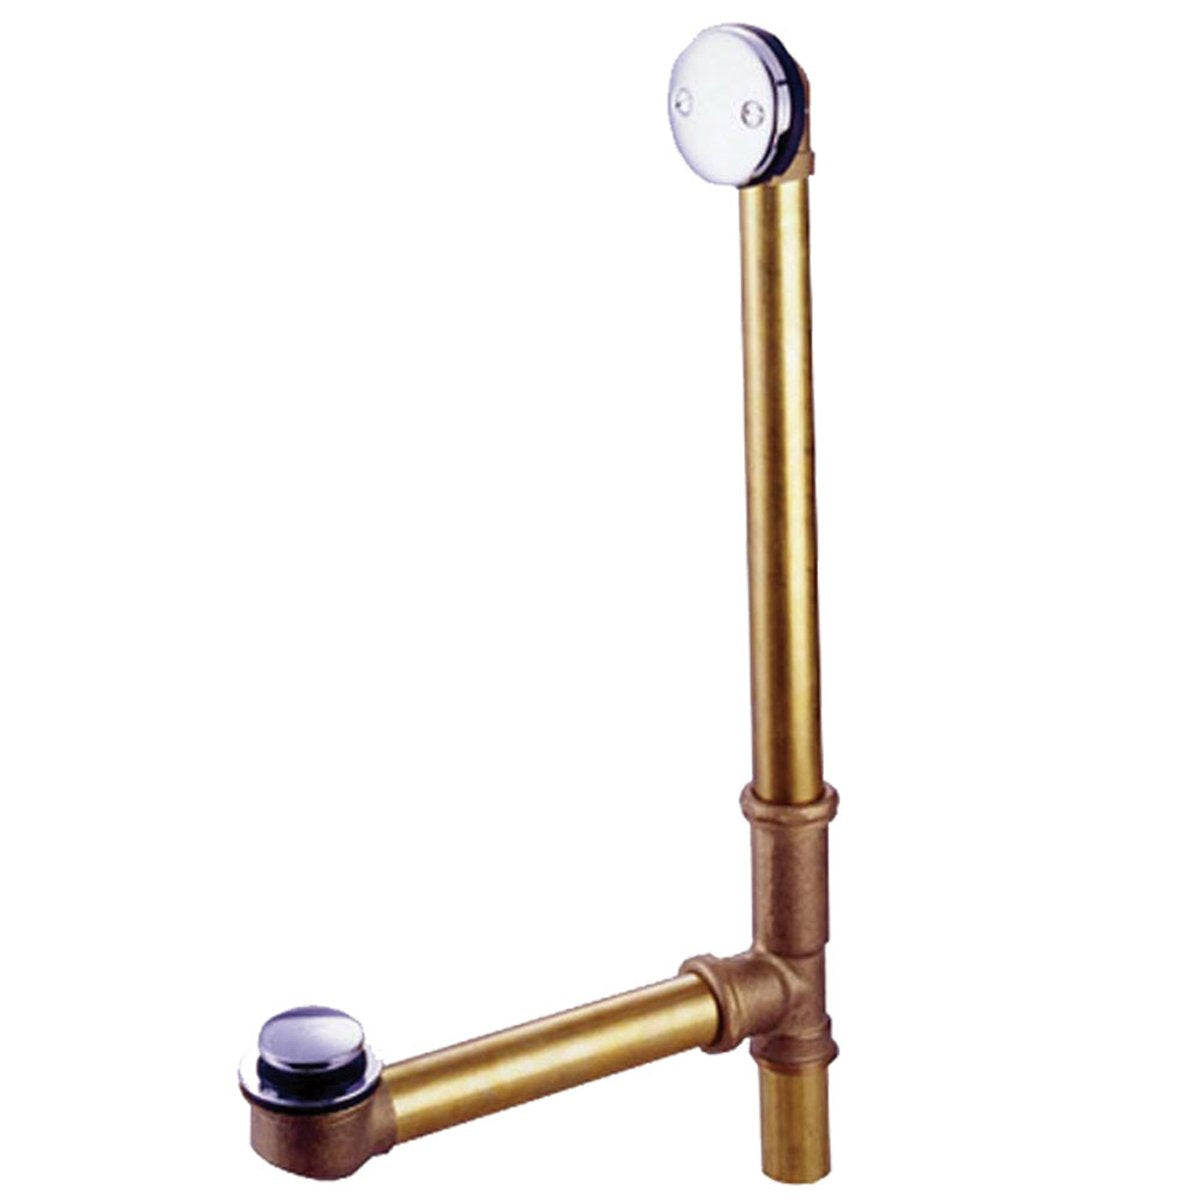 Kingston Brass Made to Match Tip-Toe Bath Tub Drain and Overflow-Bathroom Accessories-Free Shipping-Directsinks.